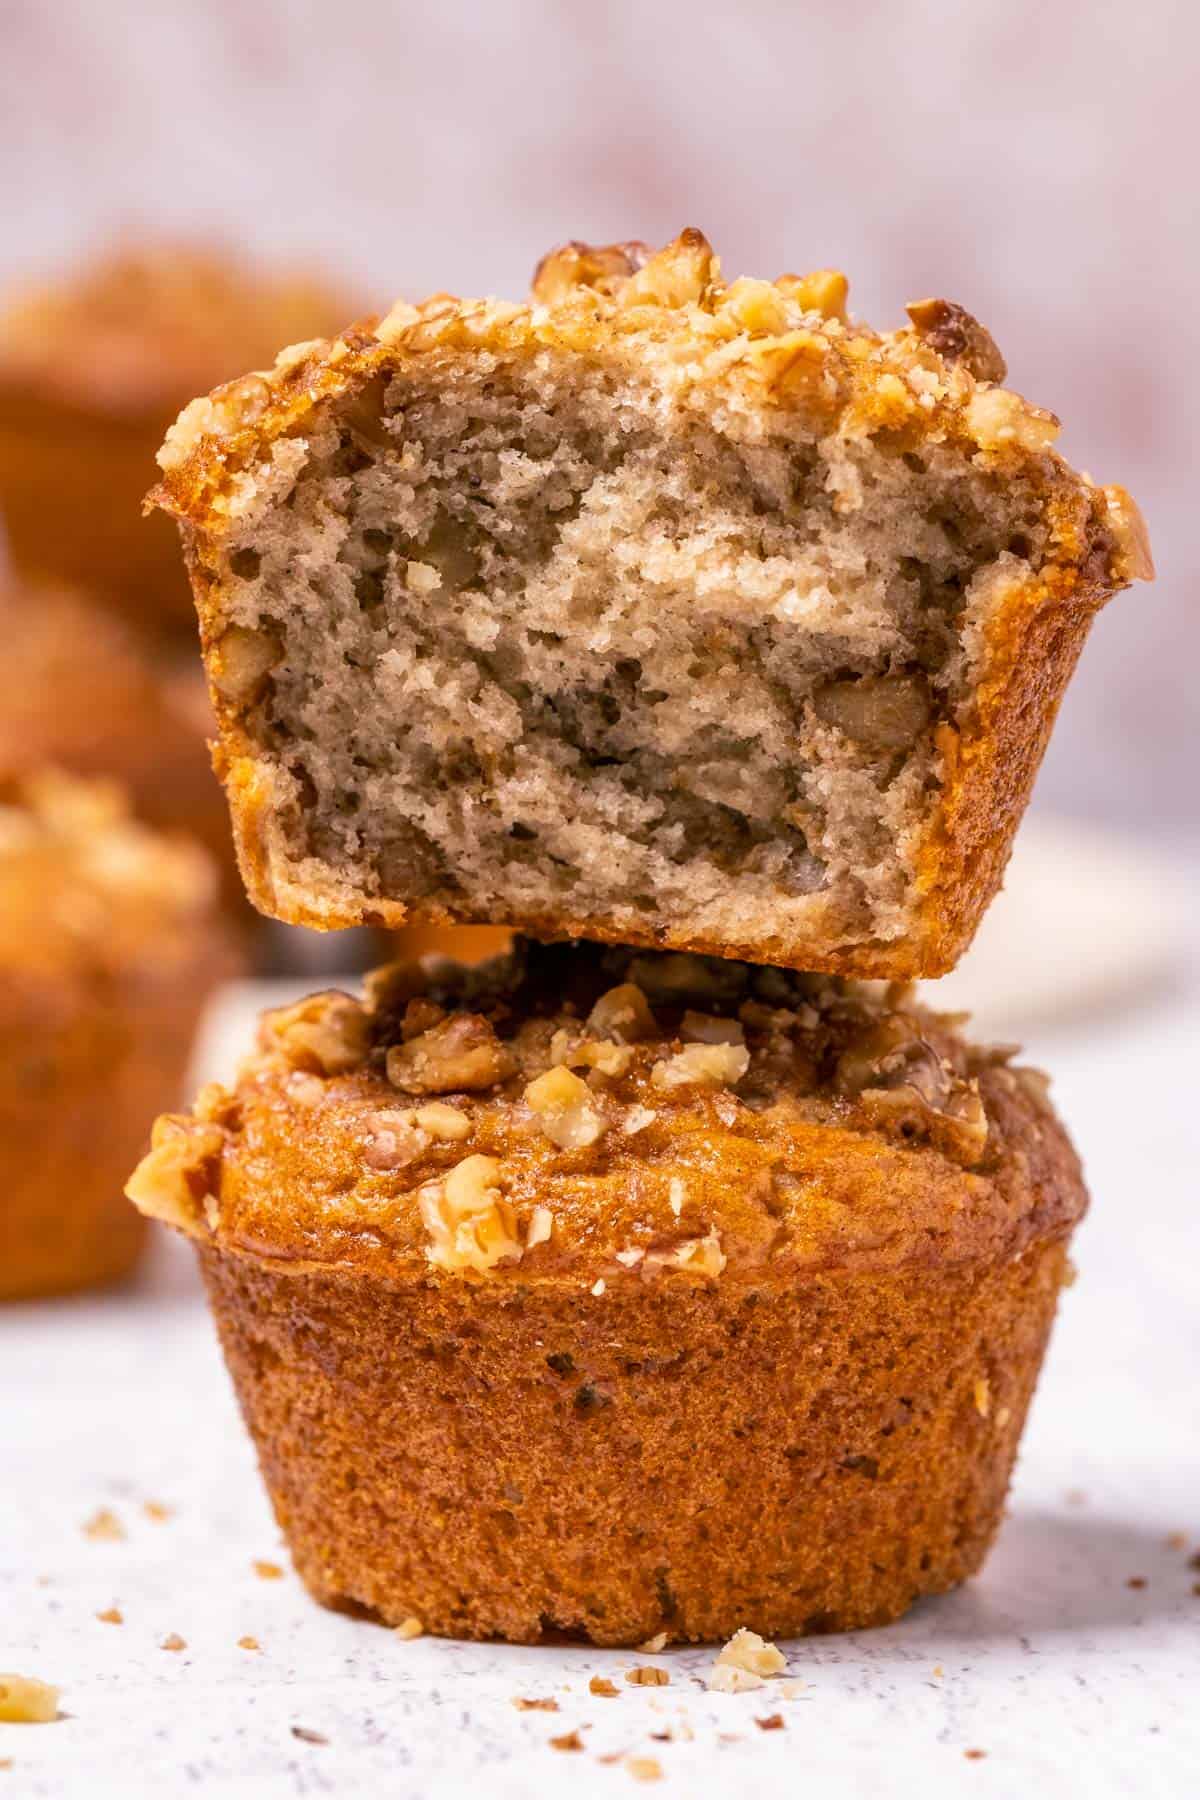 Stack of two vegan banana bread muffins with the top muffin broken in half.